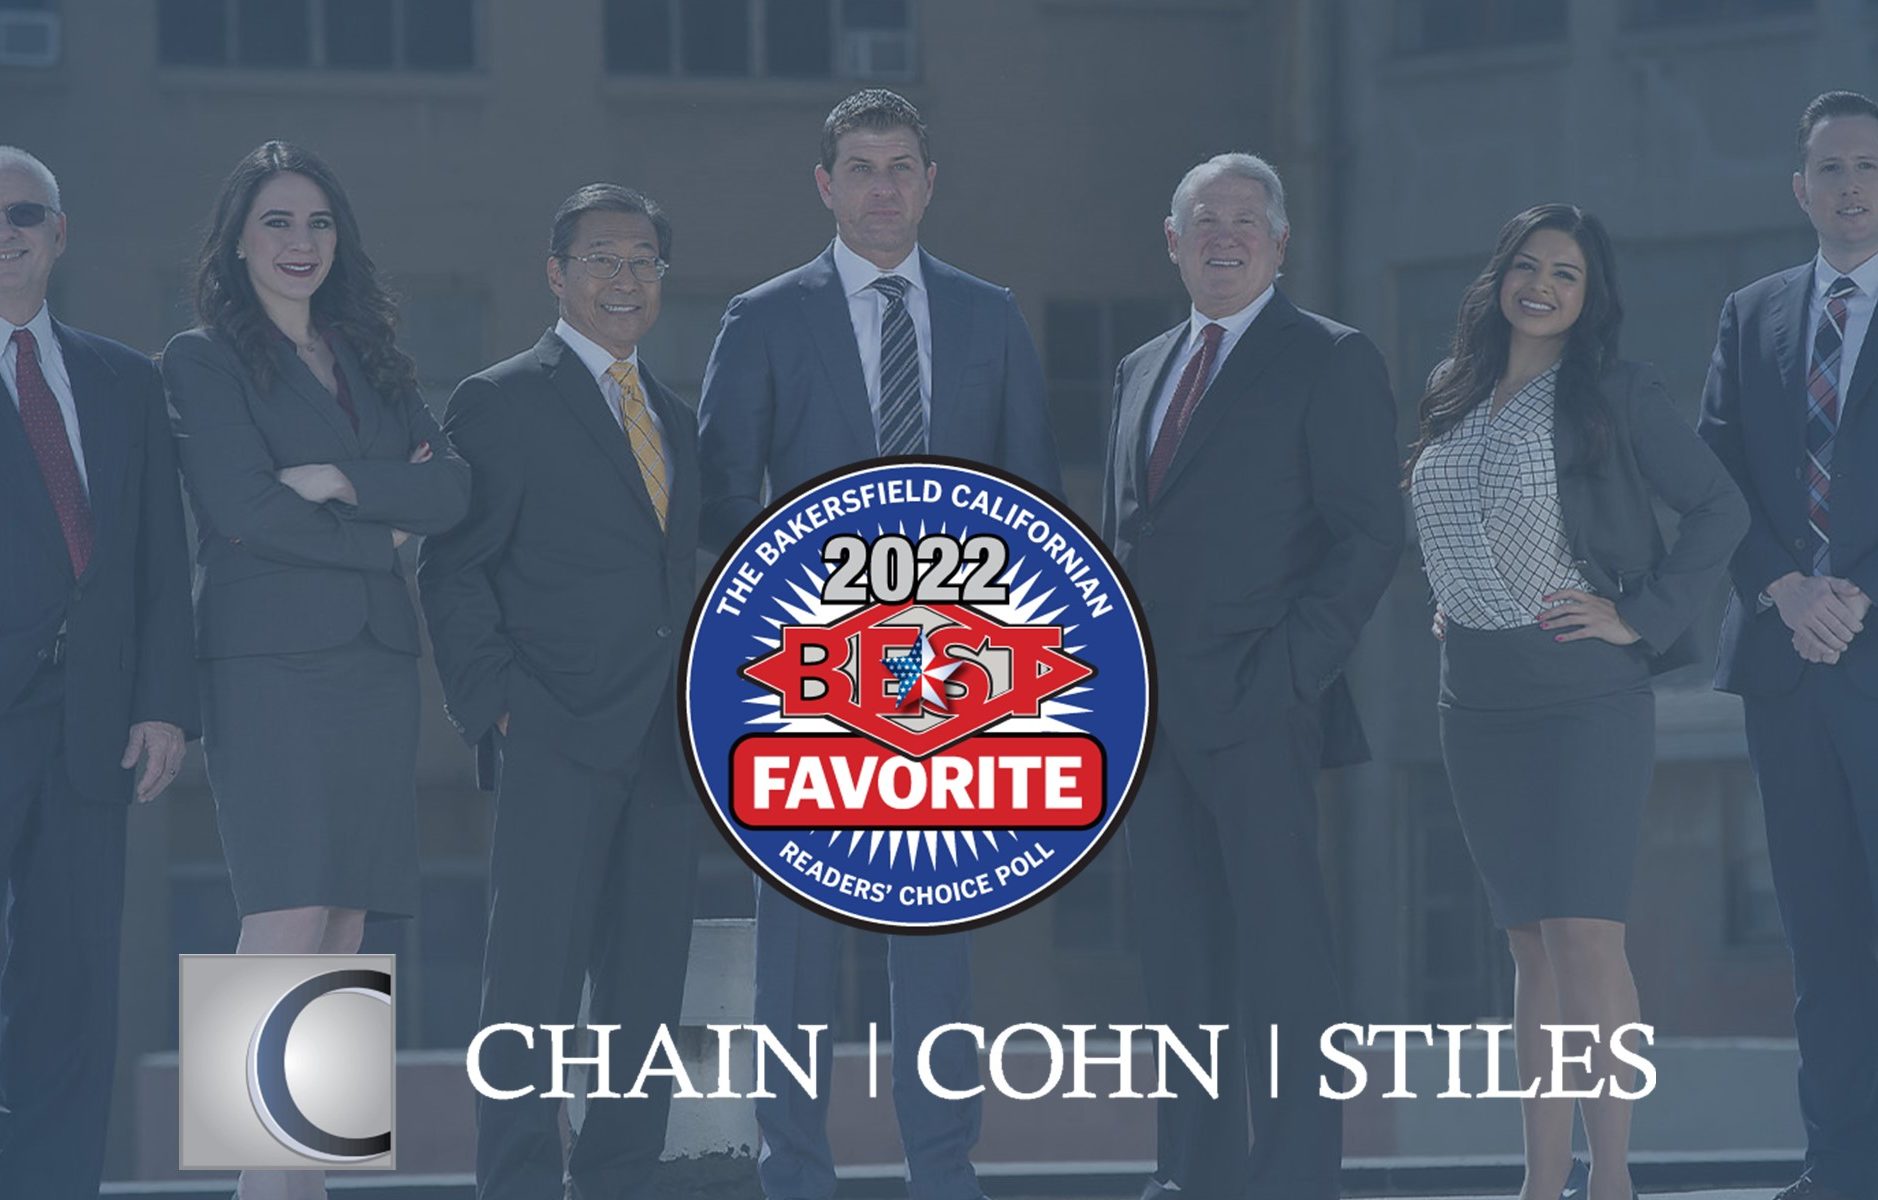 2022 ‘Best of Kern County: Chain Cohn Clark Voted Into ‘Best Law Firm’ Category for 10th Year